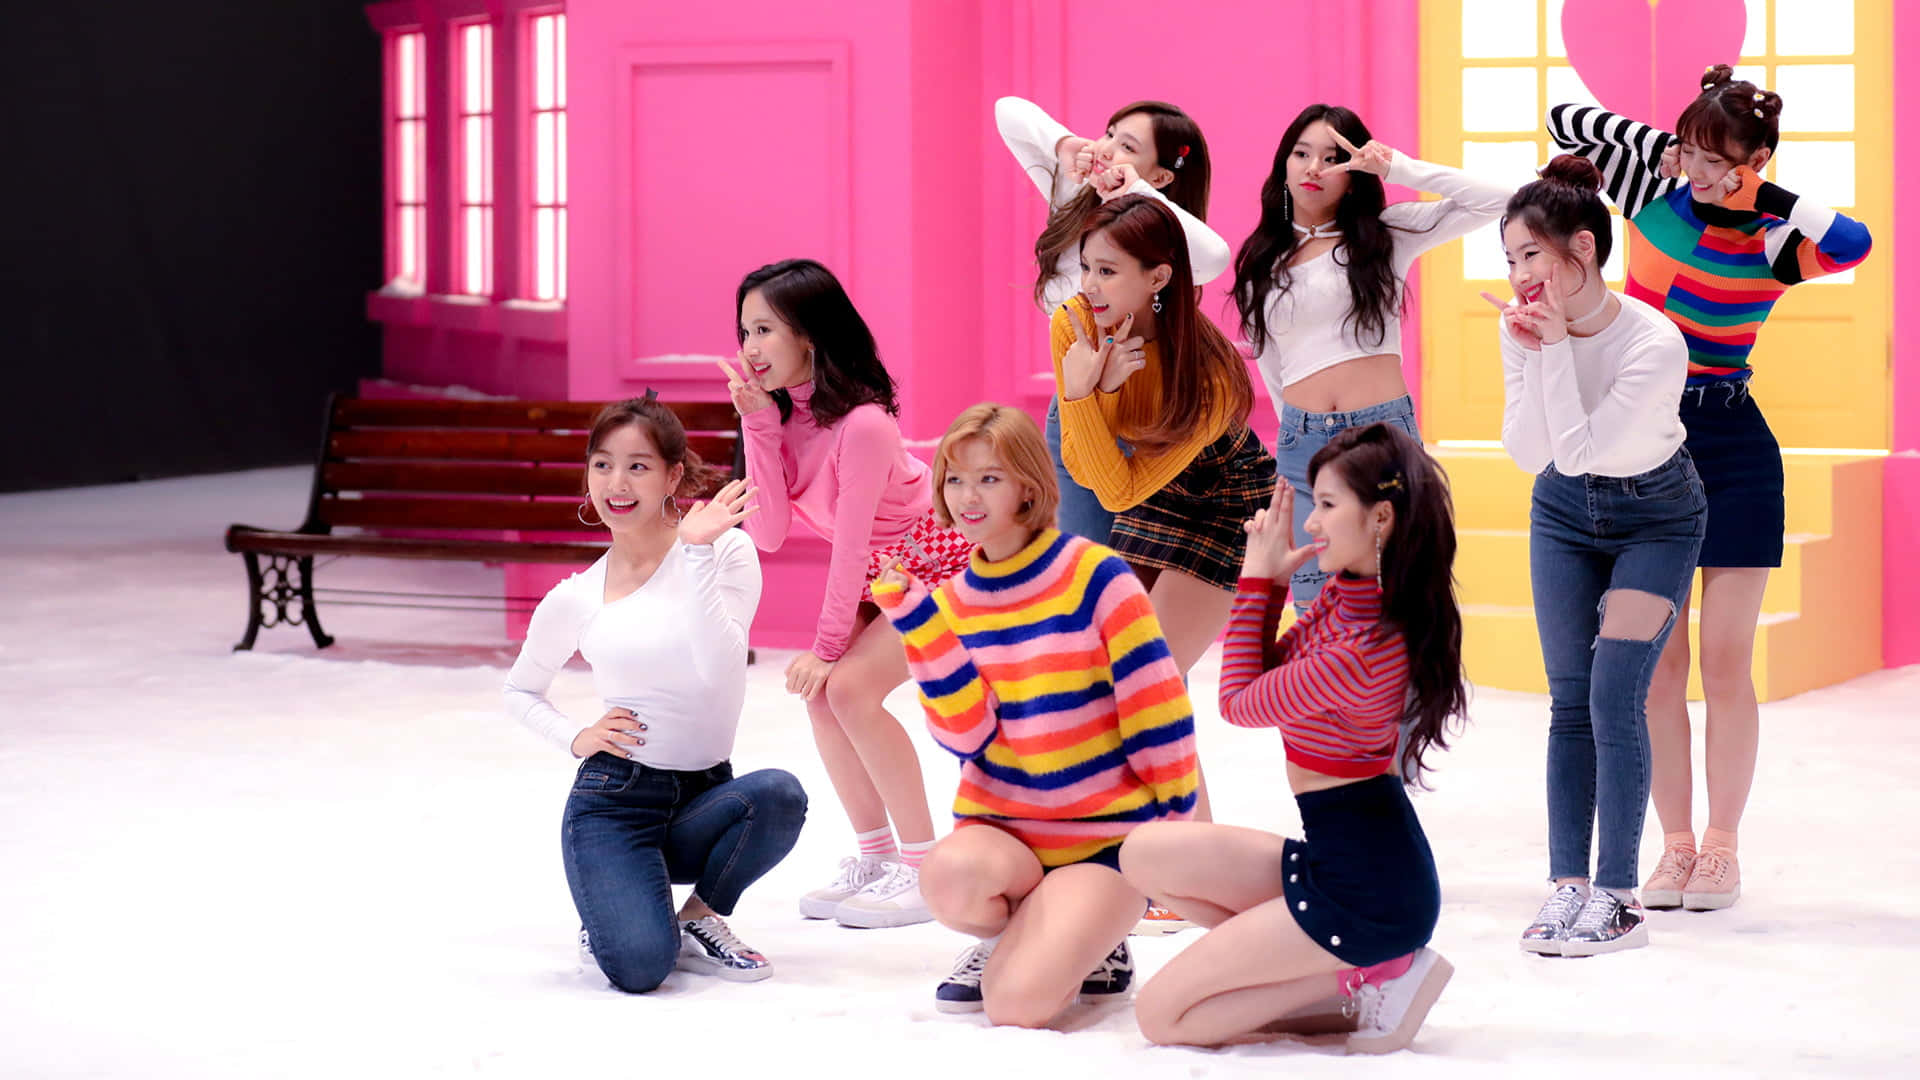 Twice - Nine Members Together in a Striking Performance